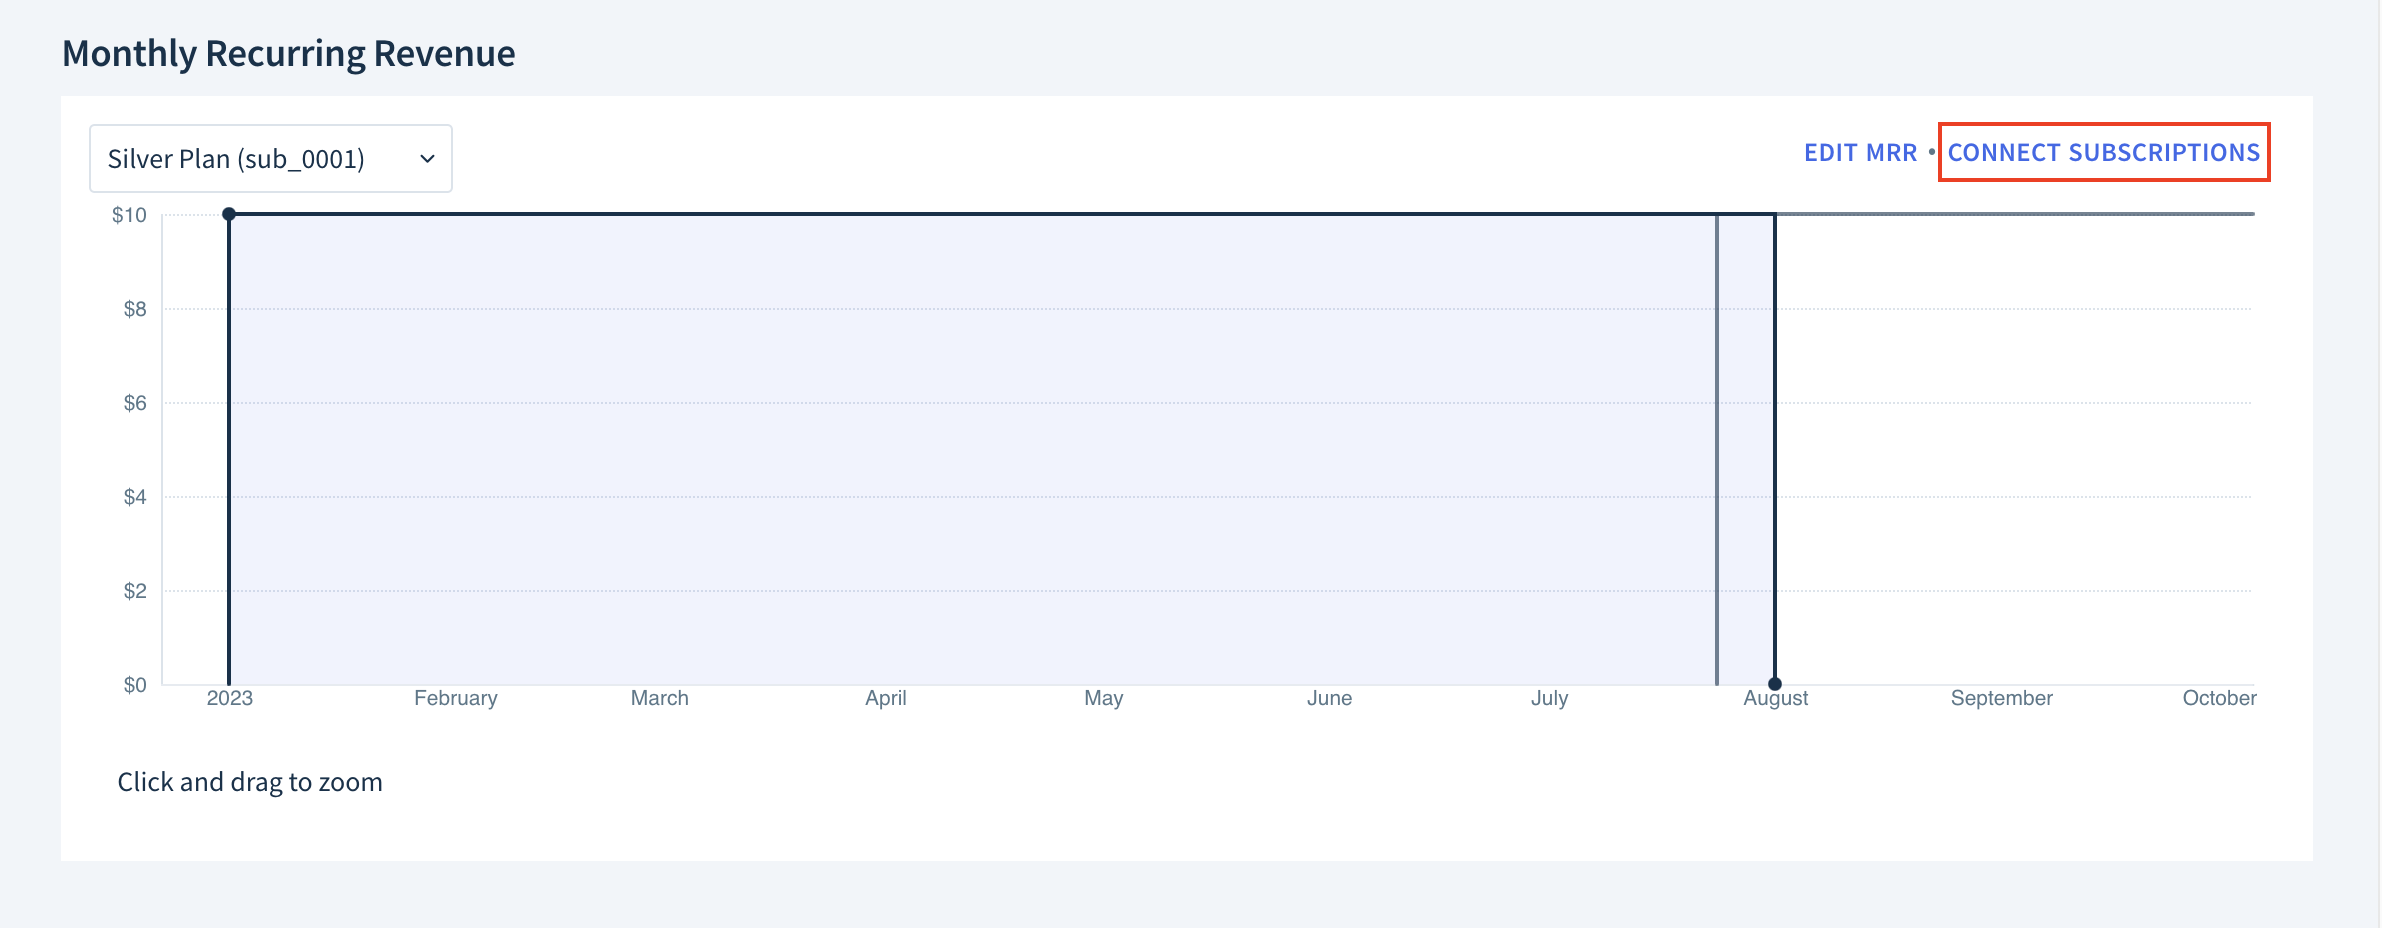 Screenshot of the Monthly Recurring Revenue chart showing two subscriptions. The Connect Subscriptions link is highlighted.